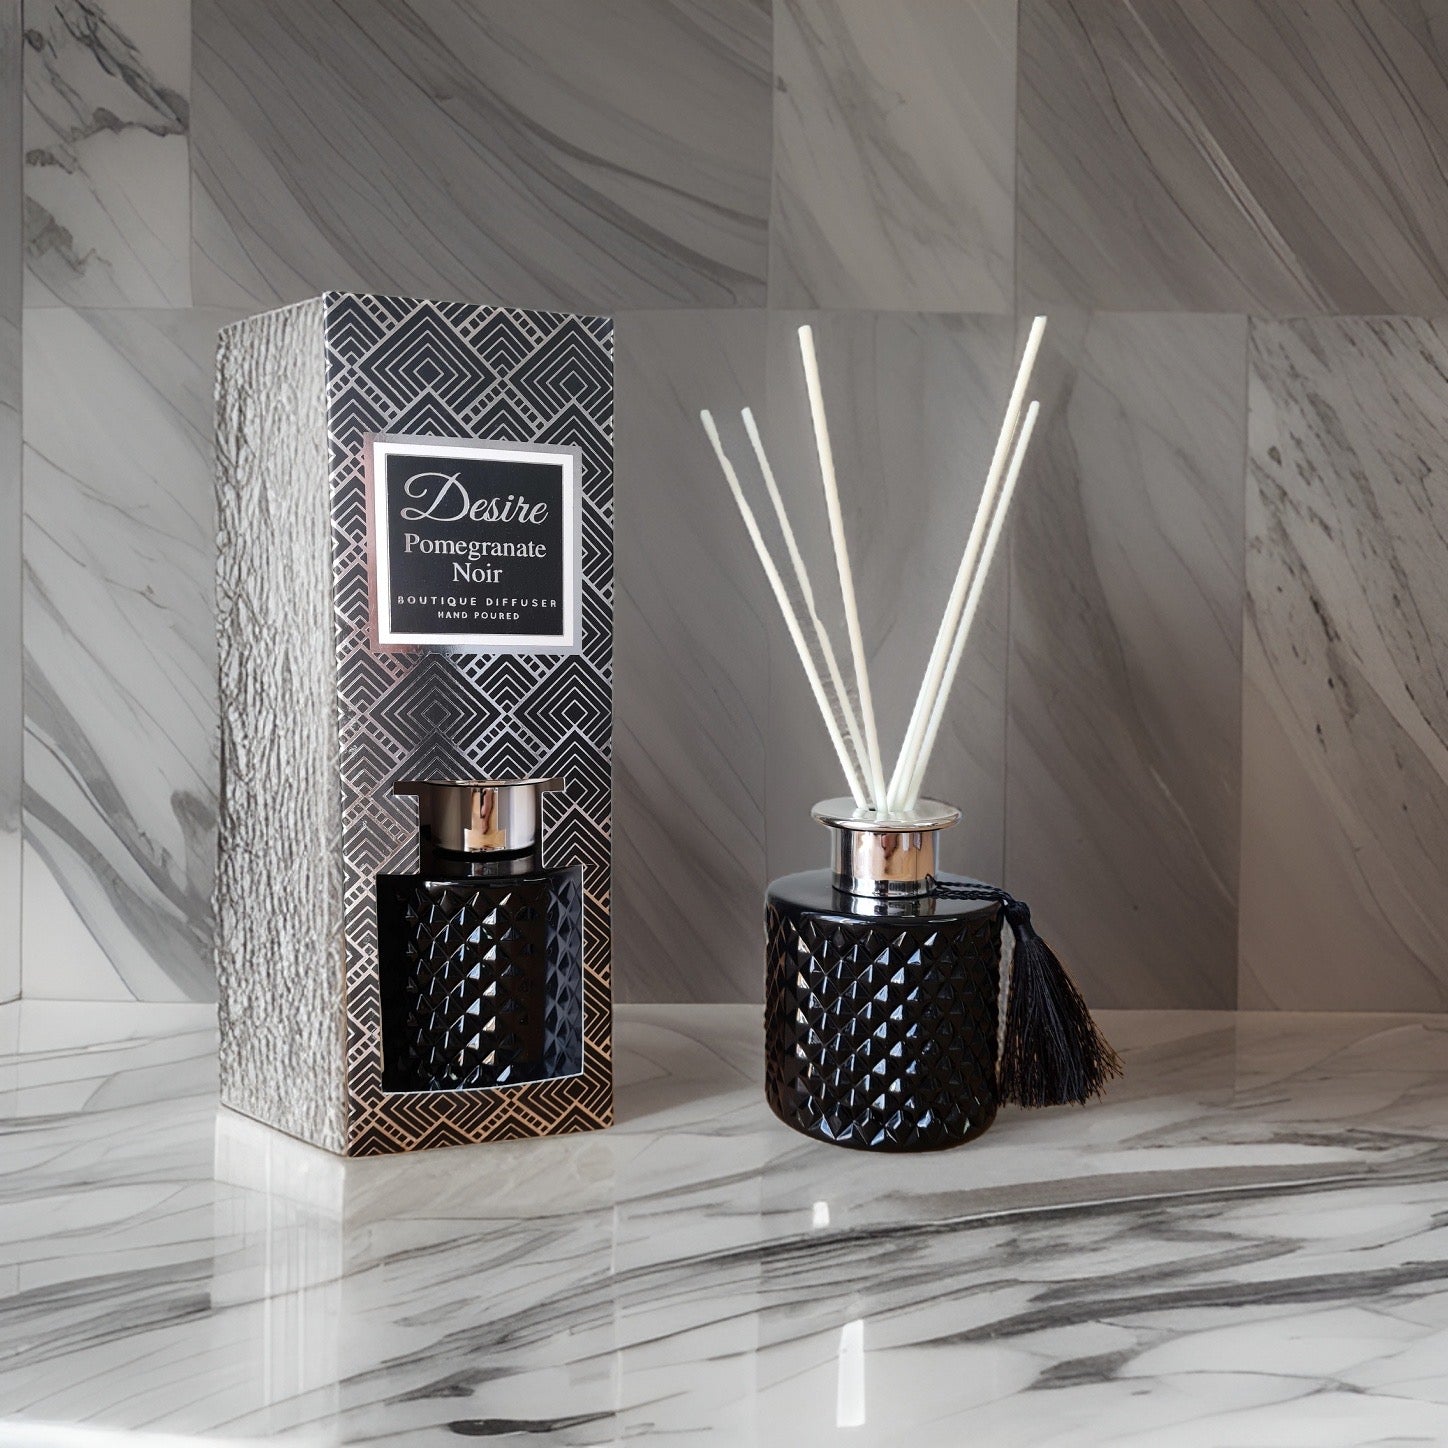 A Pomegranate Noir Reed Diffuser by The Soap Gal x with a black, patterned container next to its packaging on a marble surface.